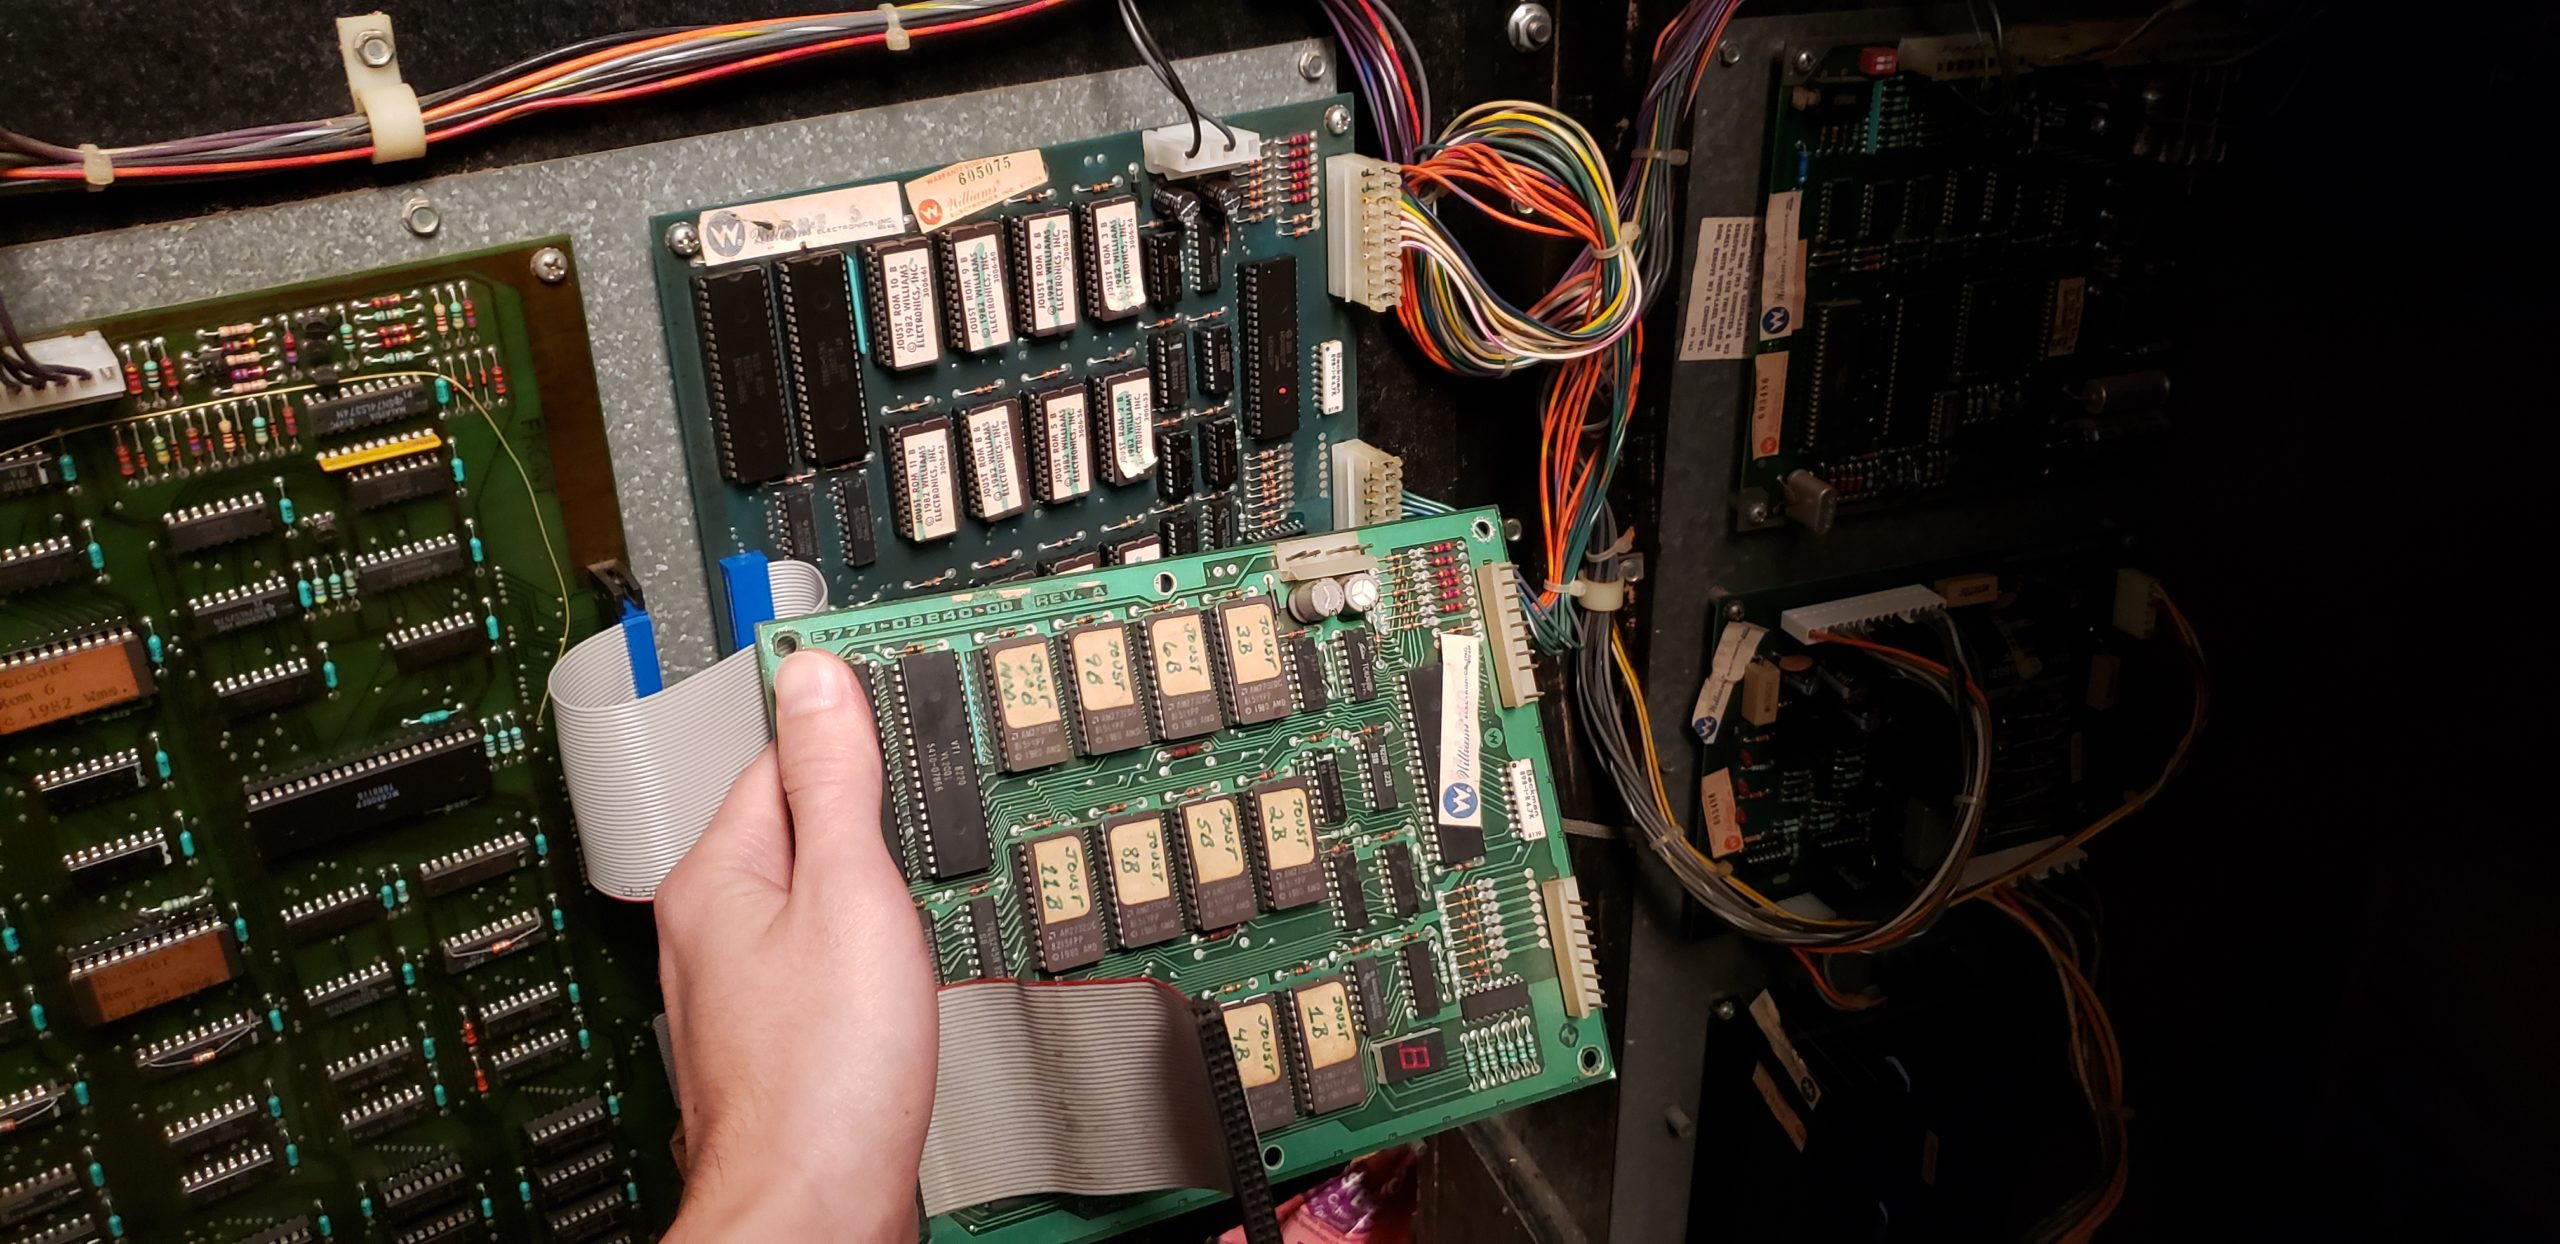 holding replacement ROM board in front of old ROM board